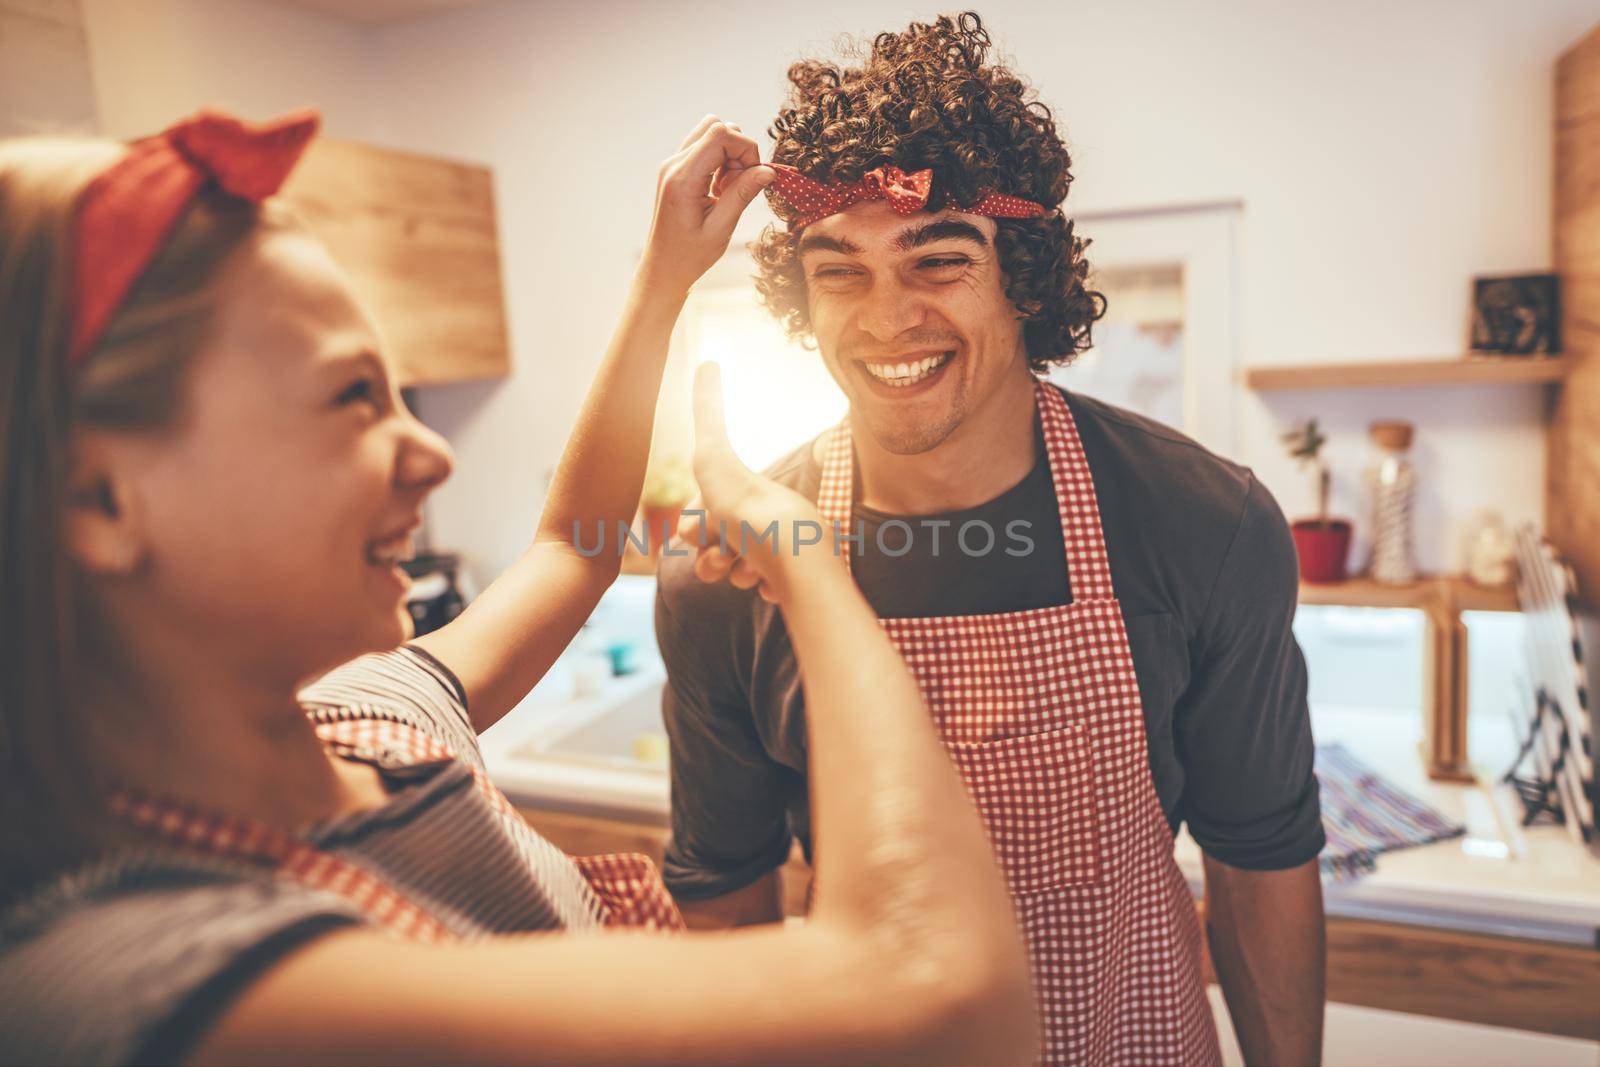 Happy father and his daughter enjoy and having fun in making and having healthy meal together at their home kitchen. The girl binds the ribbon around her father's head